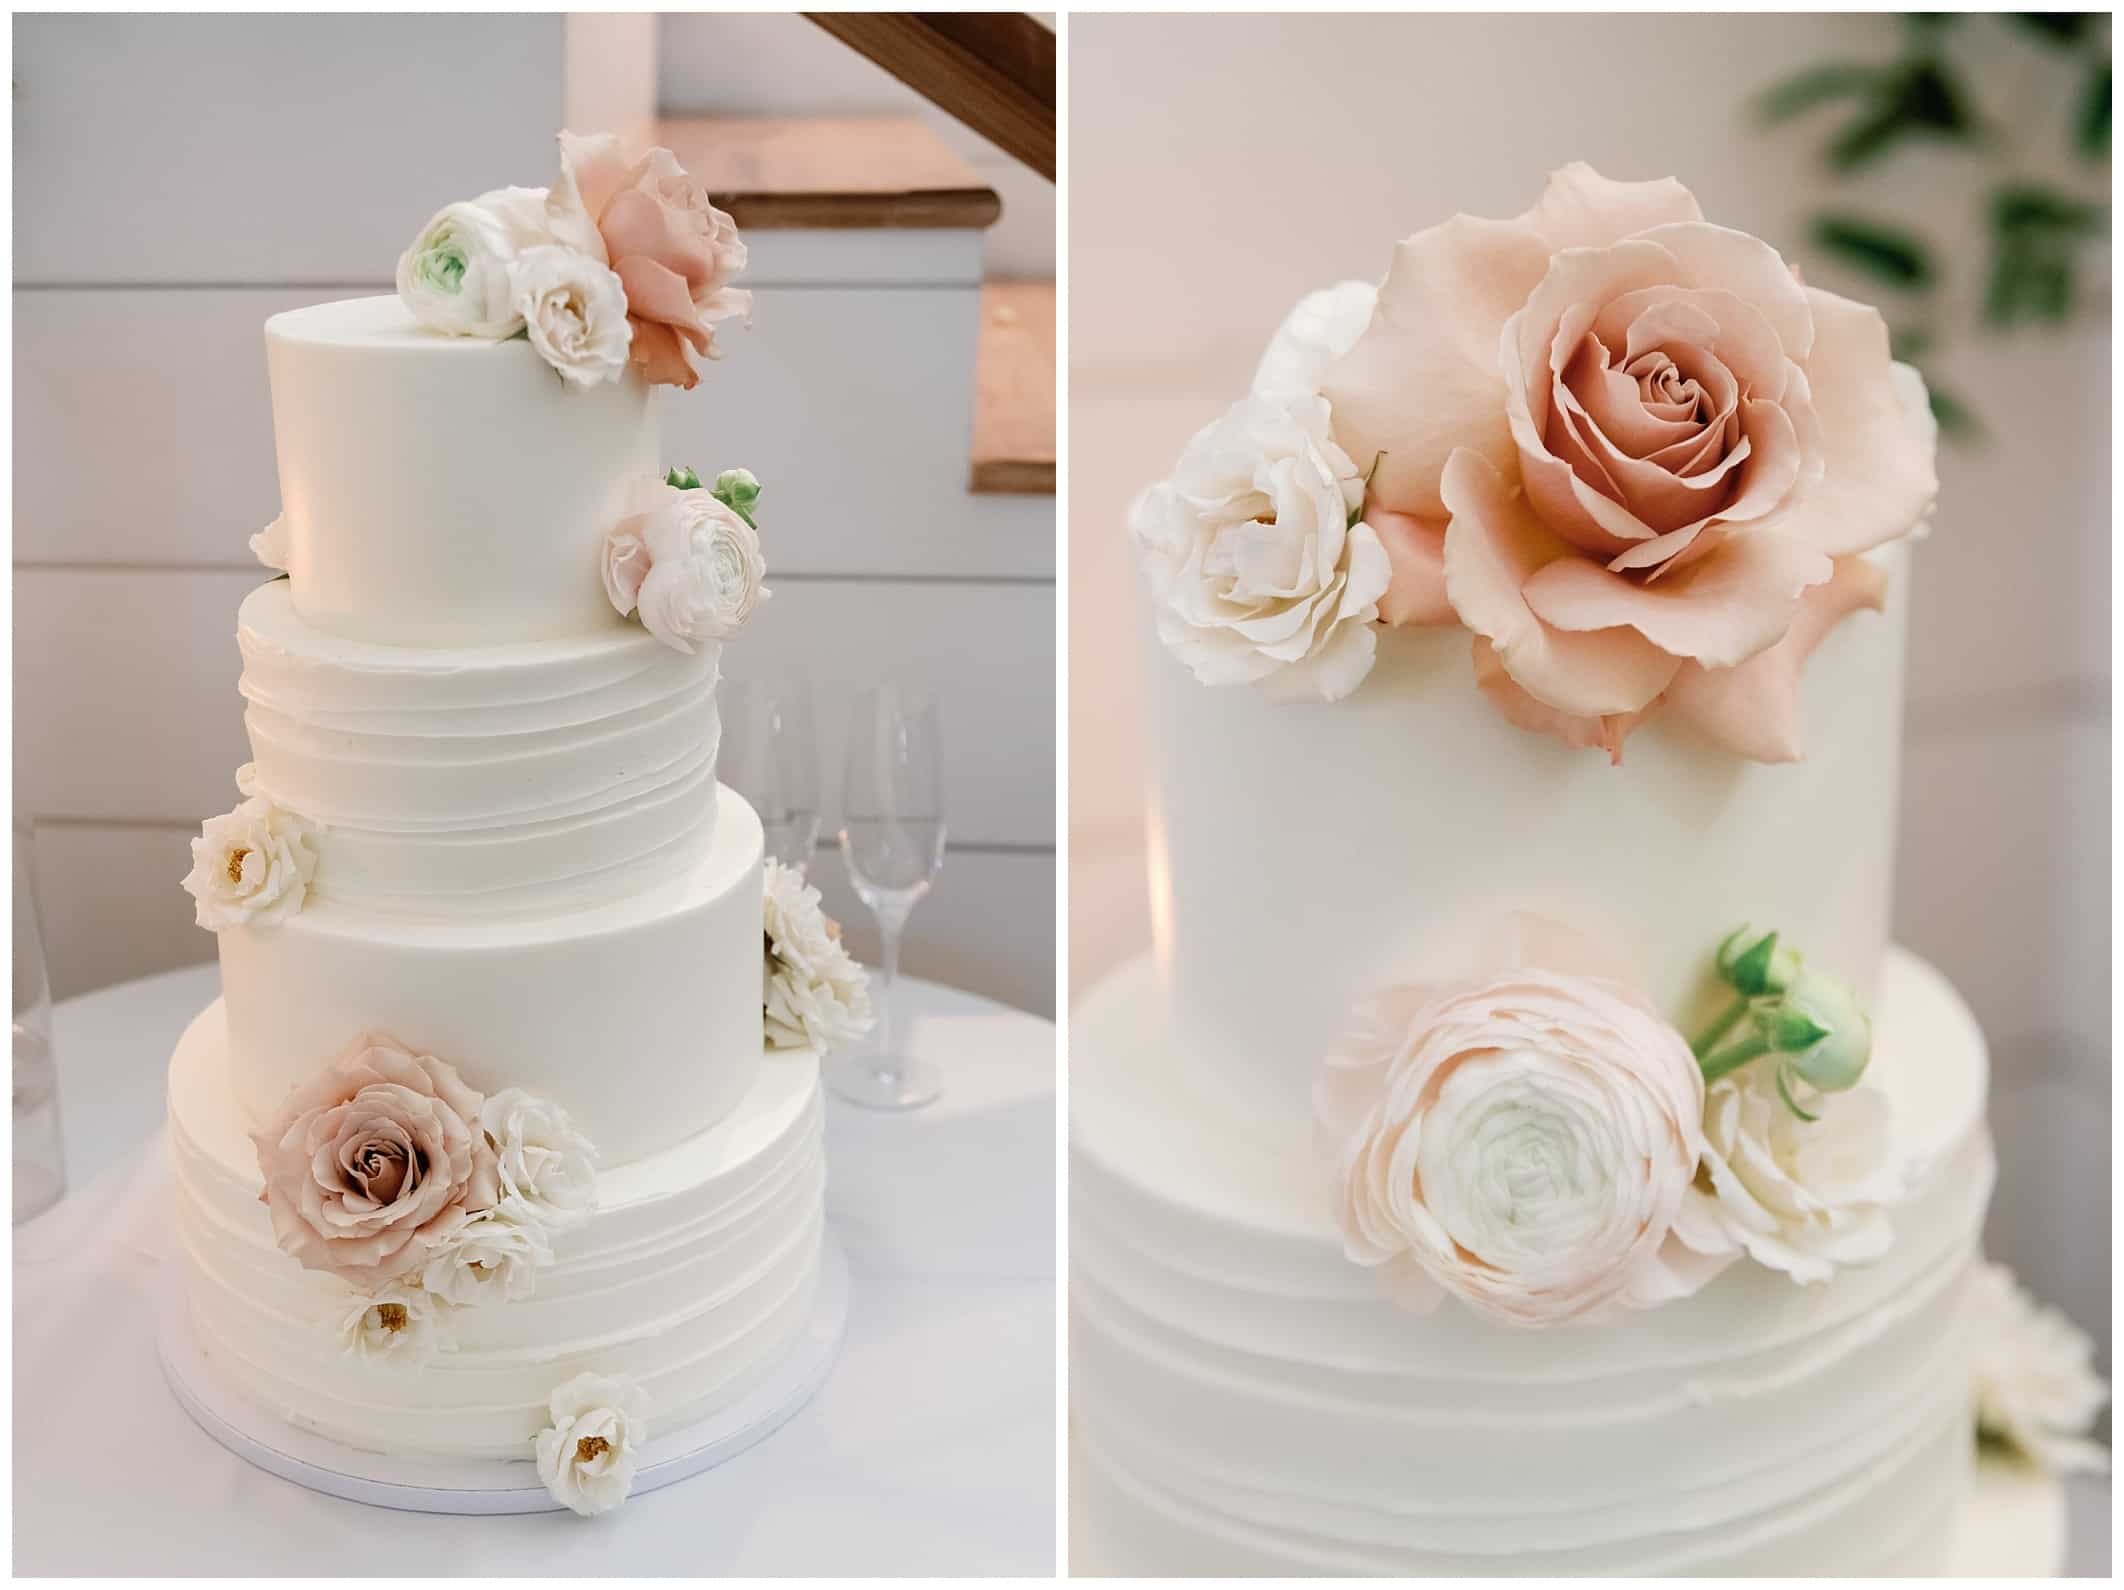 Two pictures of a wedding cake with roses on it.